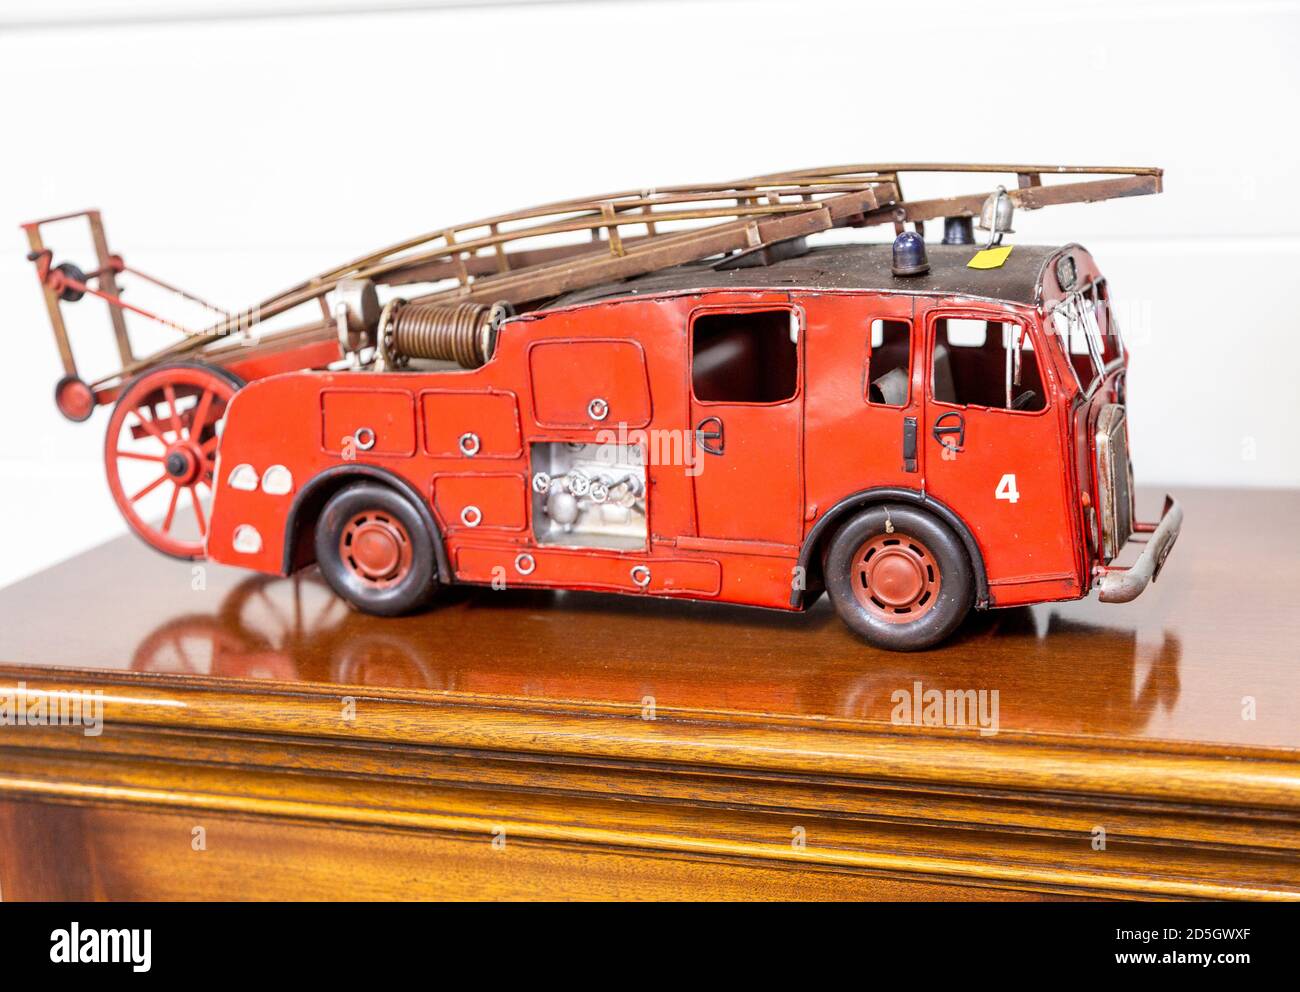 Old red model fire engine on display in house clearance auction sale room, UK Stock Photo